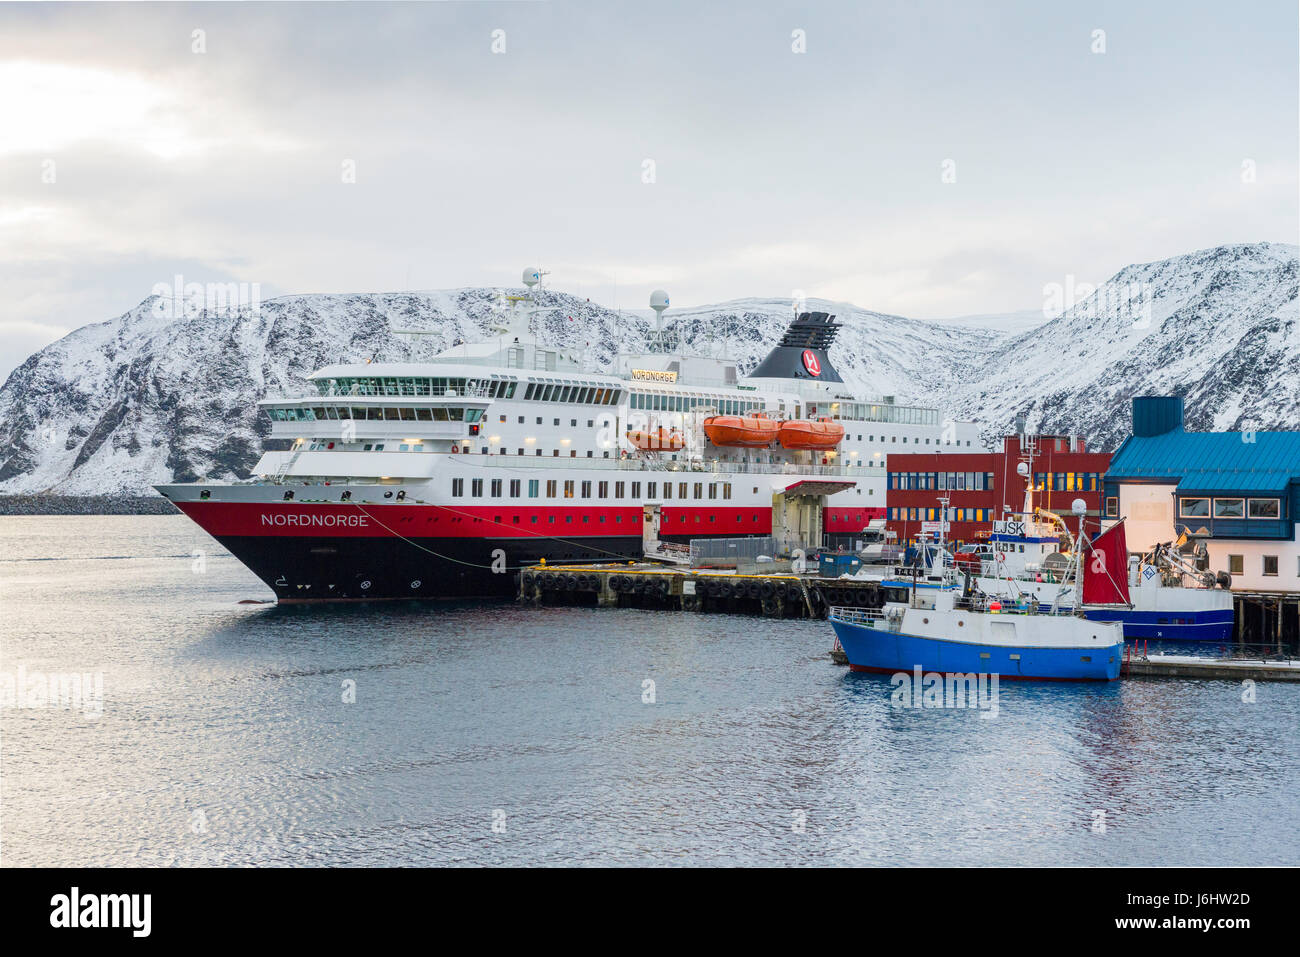 Hurtigruten Coastal Express cruise ship MS Nordnorge is berthed at Honningsvåg, Finnmark County, Norway. Stock Photo